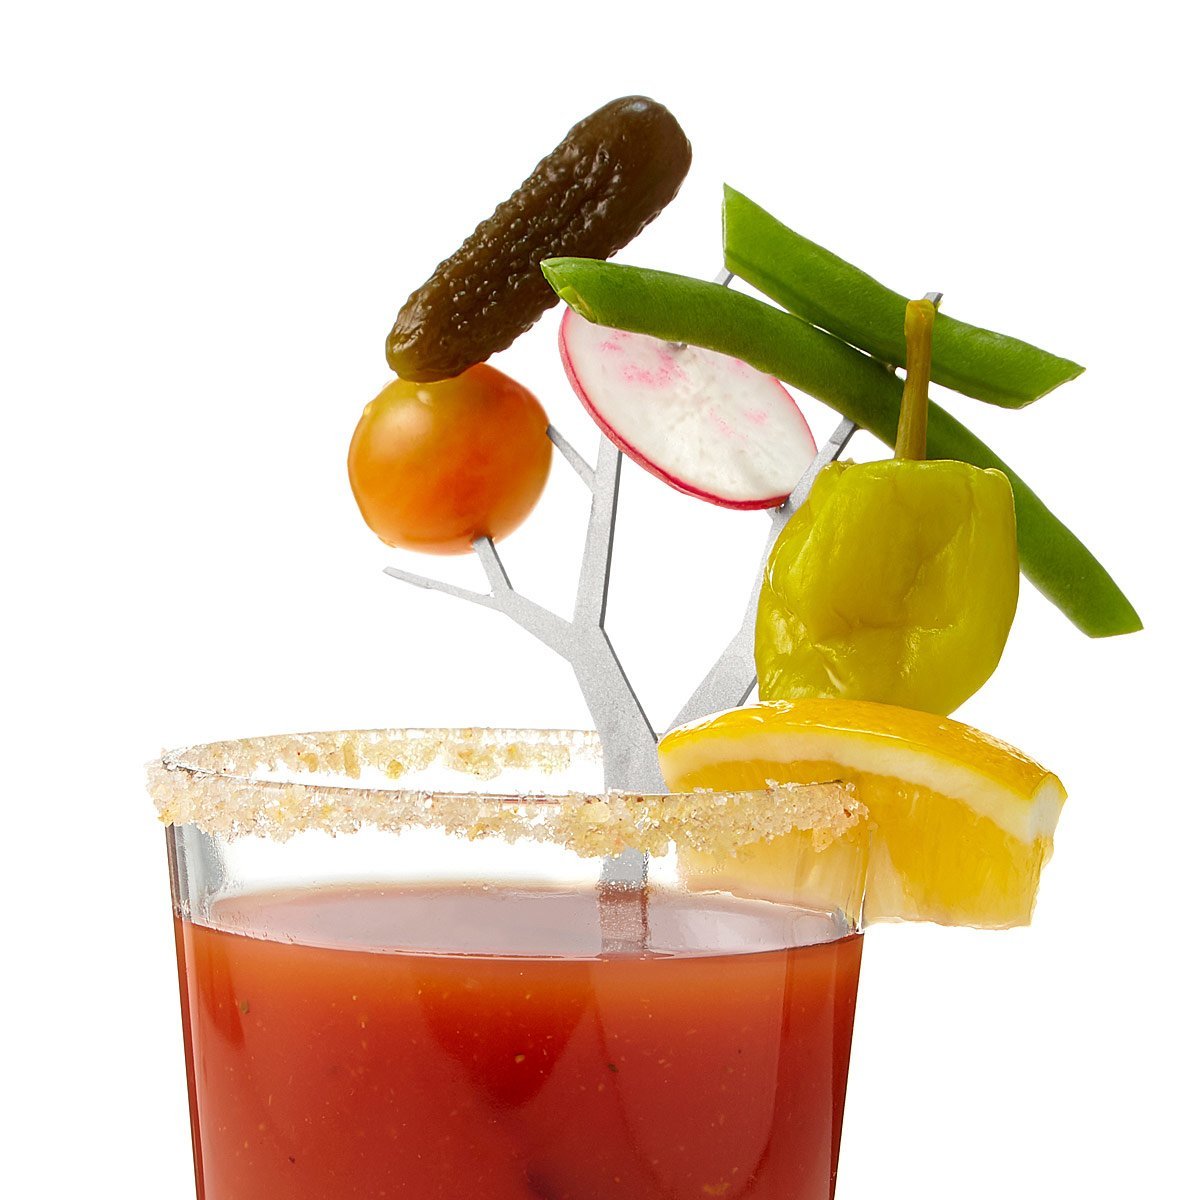 Embellish your Bloody Mary with a cocktail branch